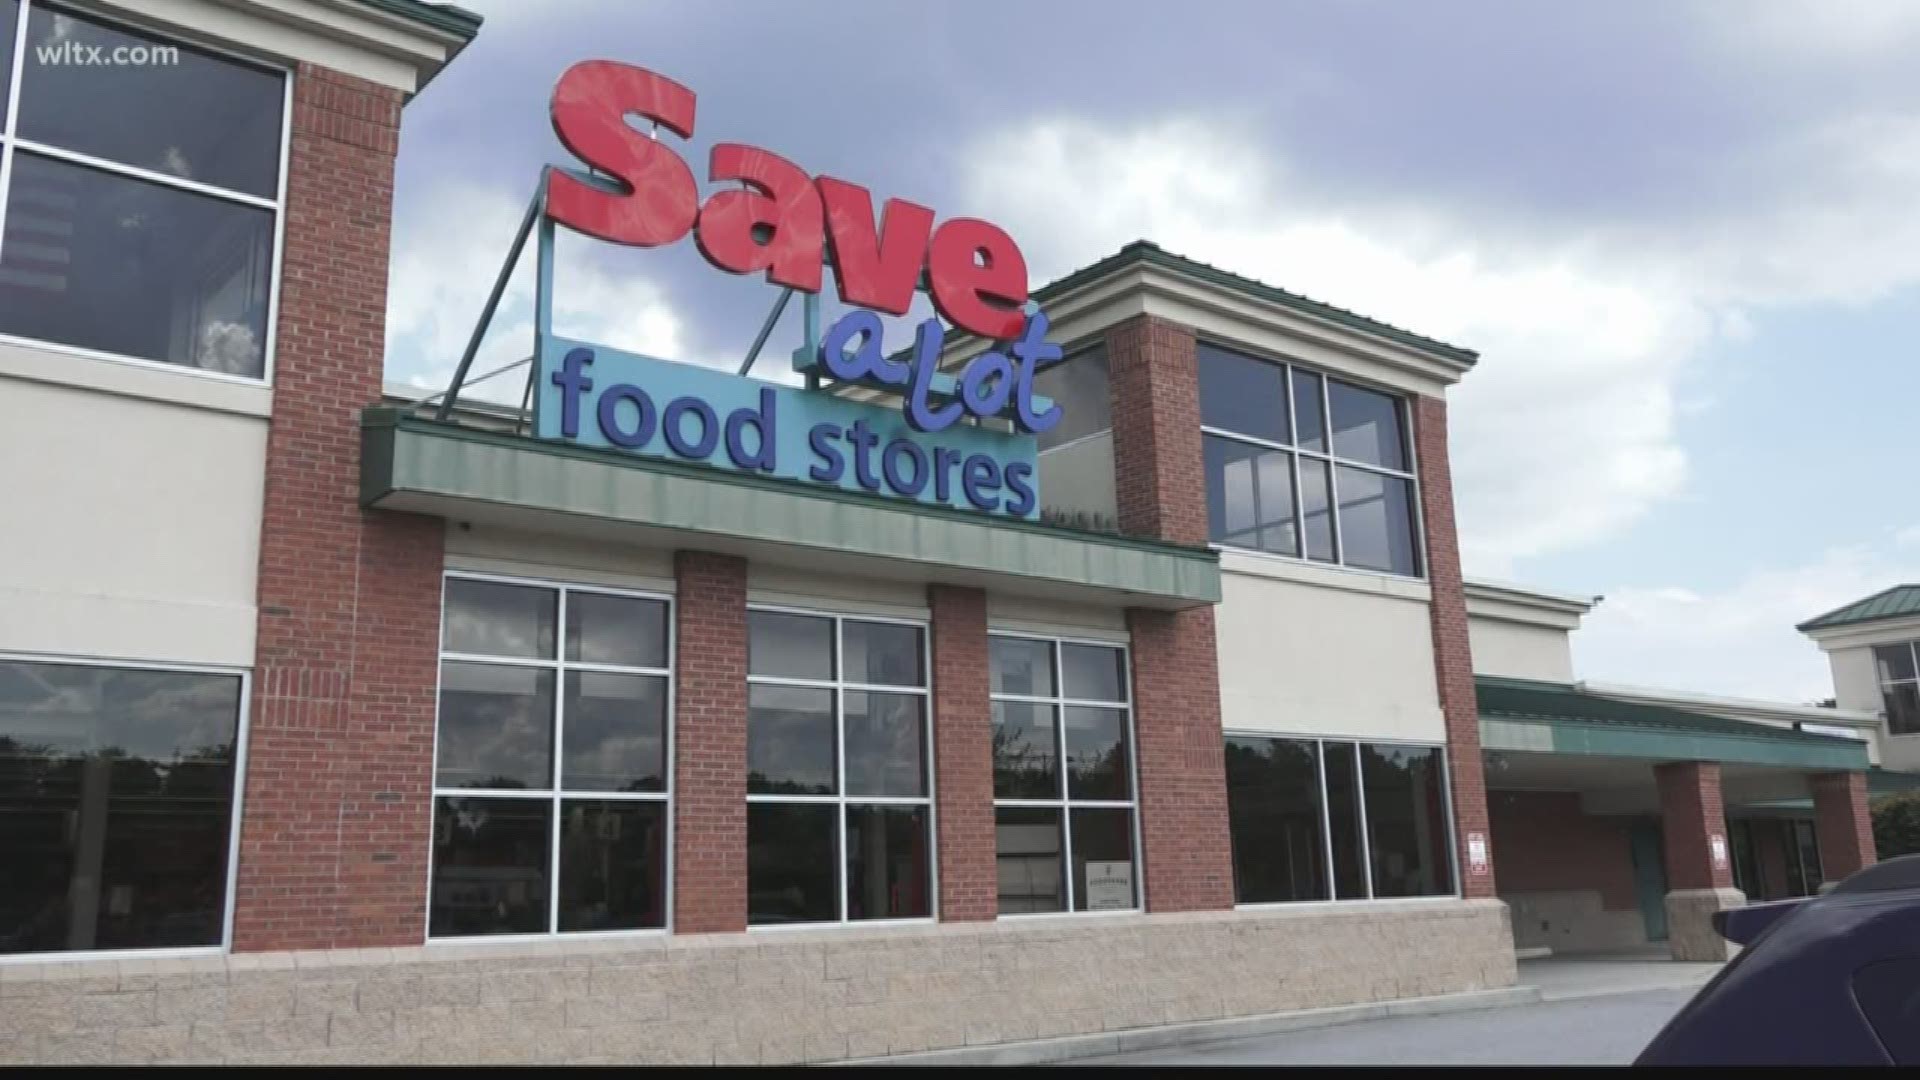 The Harden St. Save A Lot closing on August 24th creates a Low Food Access Area for residents living in the Celia Saxon neighborhood and surrounding areas. https://on.wltx.com/2Zd8Gpb